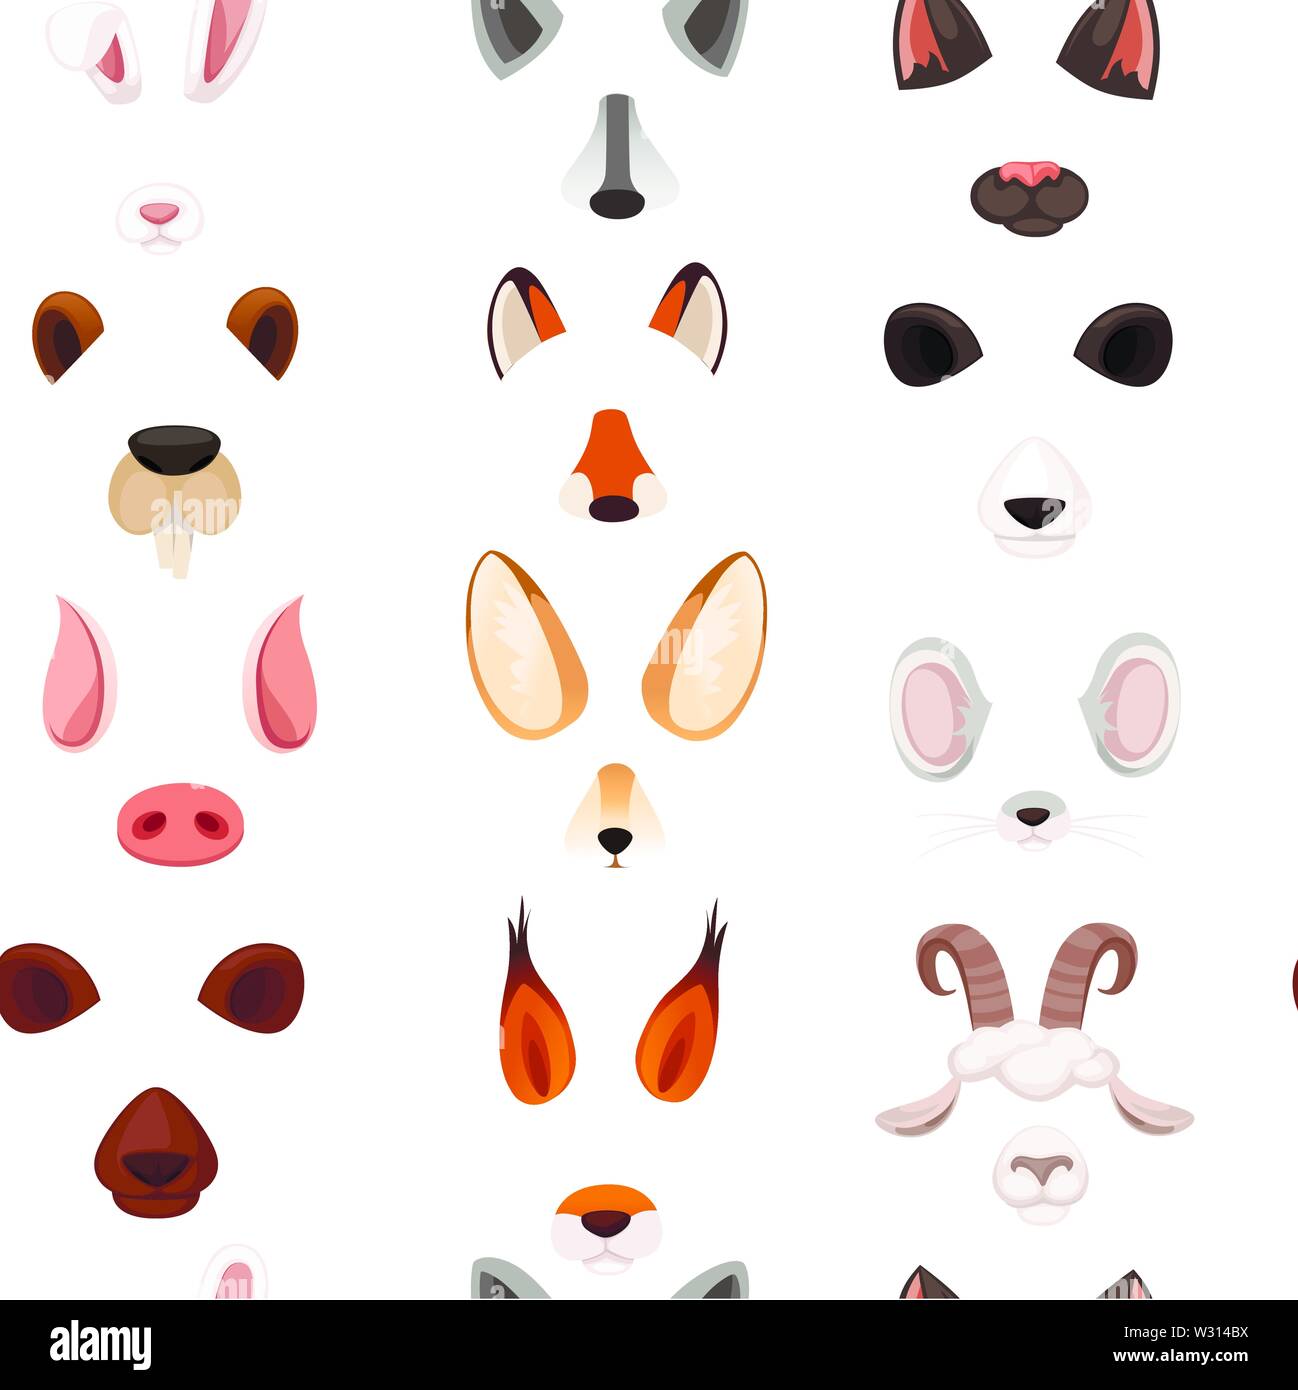 Seamless pattern animal face elements set cartoon flat design ears and noses vector illustration on white background. Stock Vector